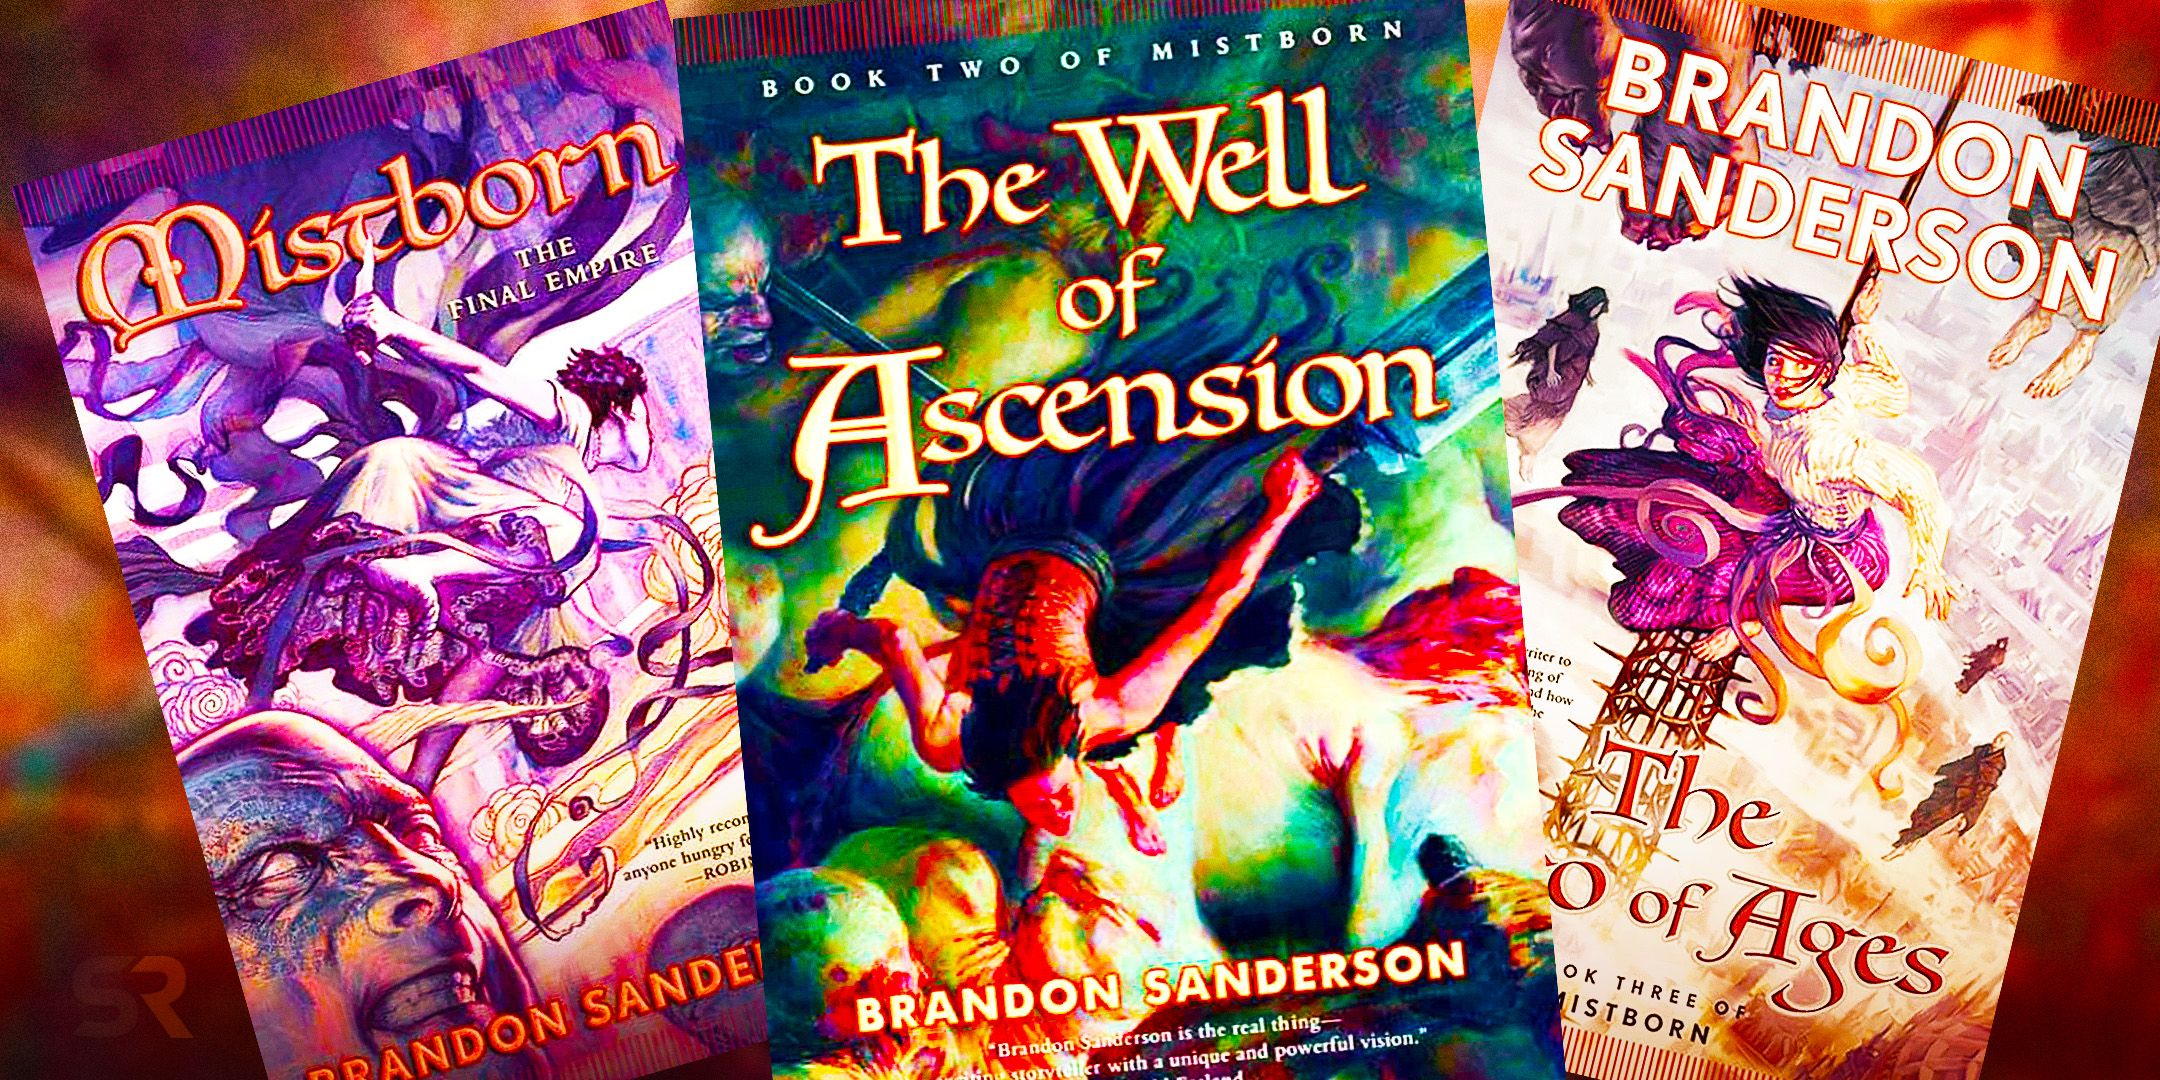 The covers of the original Mistborn trilogy: The Final Empire, The Well of Ascension, and The Hero of Ages